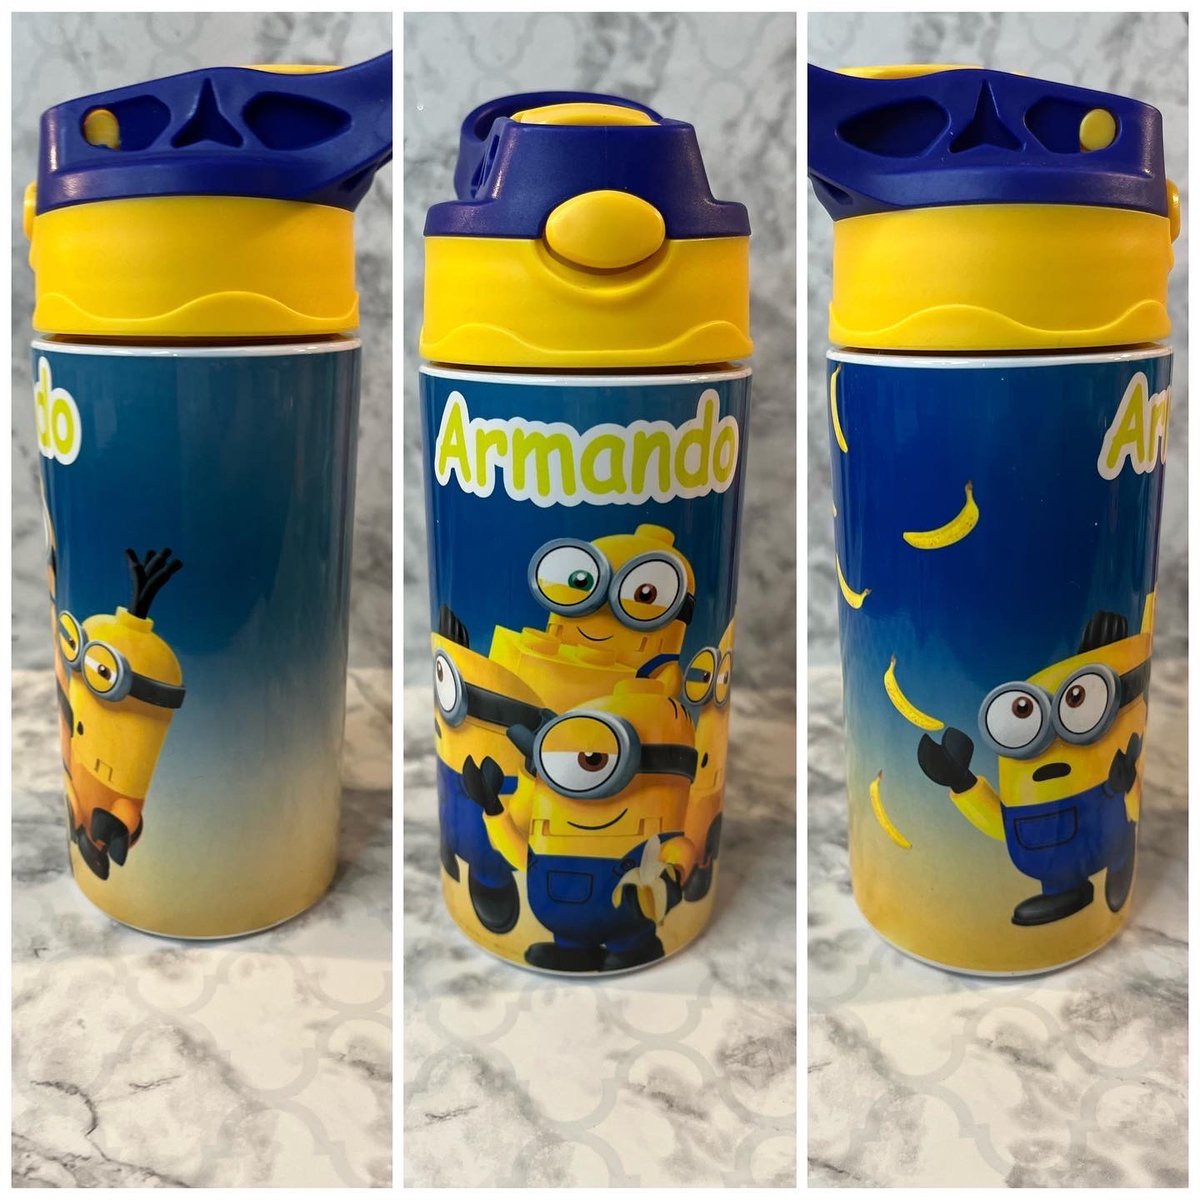 https://assets.bigcartel.com/product_images/99934015-b6c1-46be-a9f6-9bcfe6ad611e/minions-kids-water-bottle.jpg?auto=format&fit=max&h=1200&a...